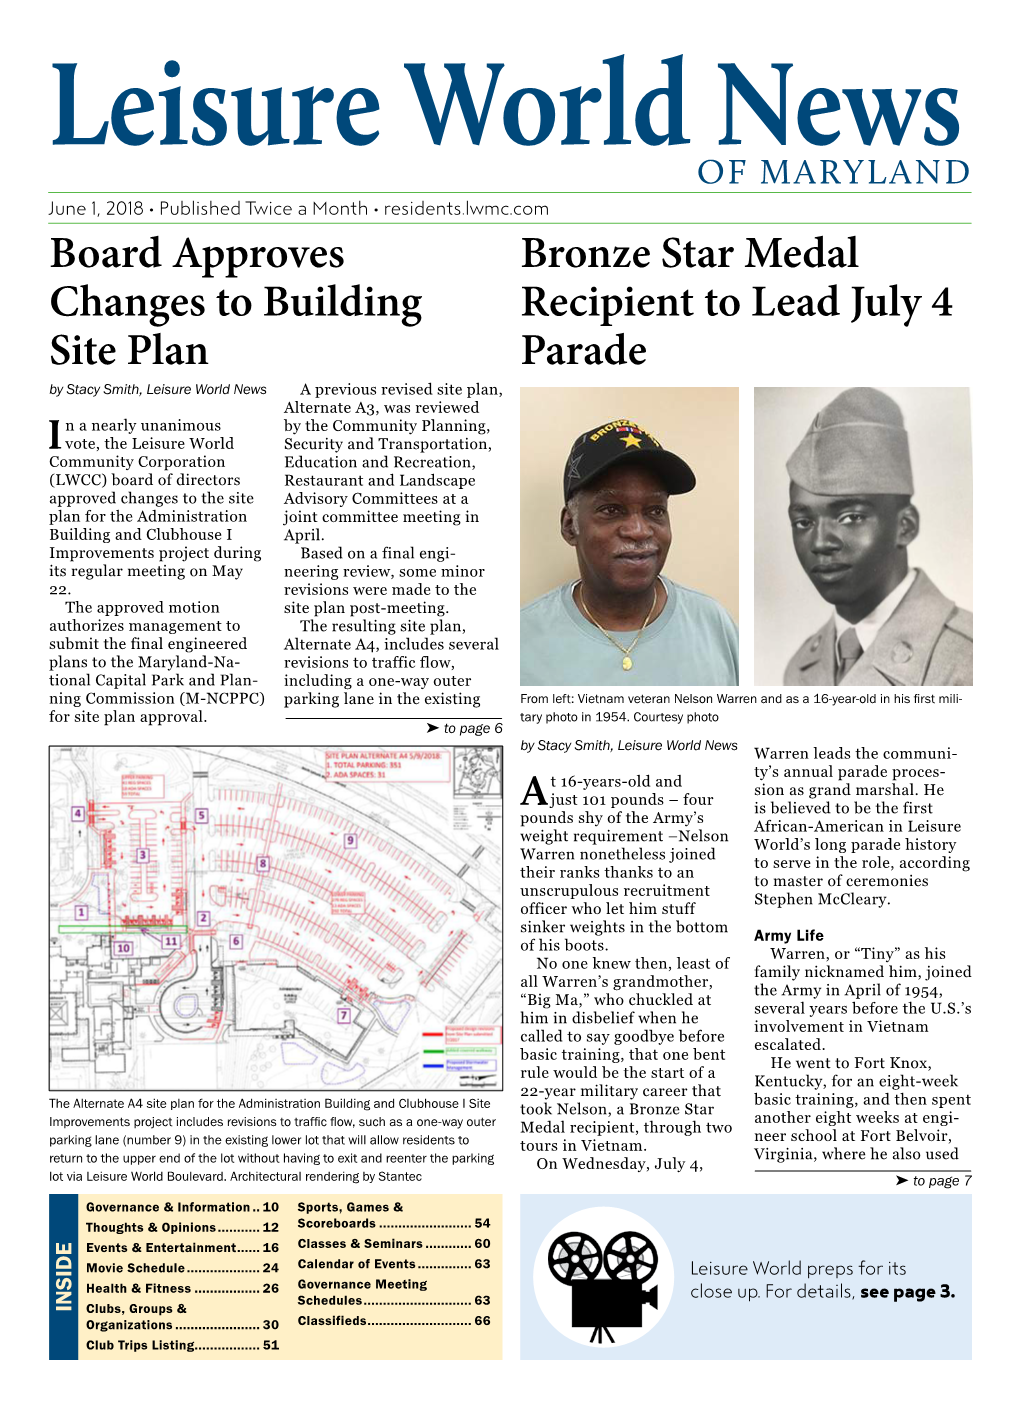 Board Approves Changes to Building Site Plan Bronze Star Medal